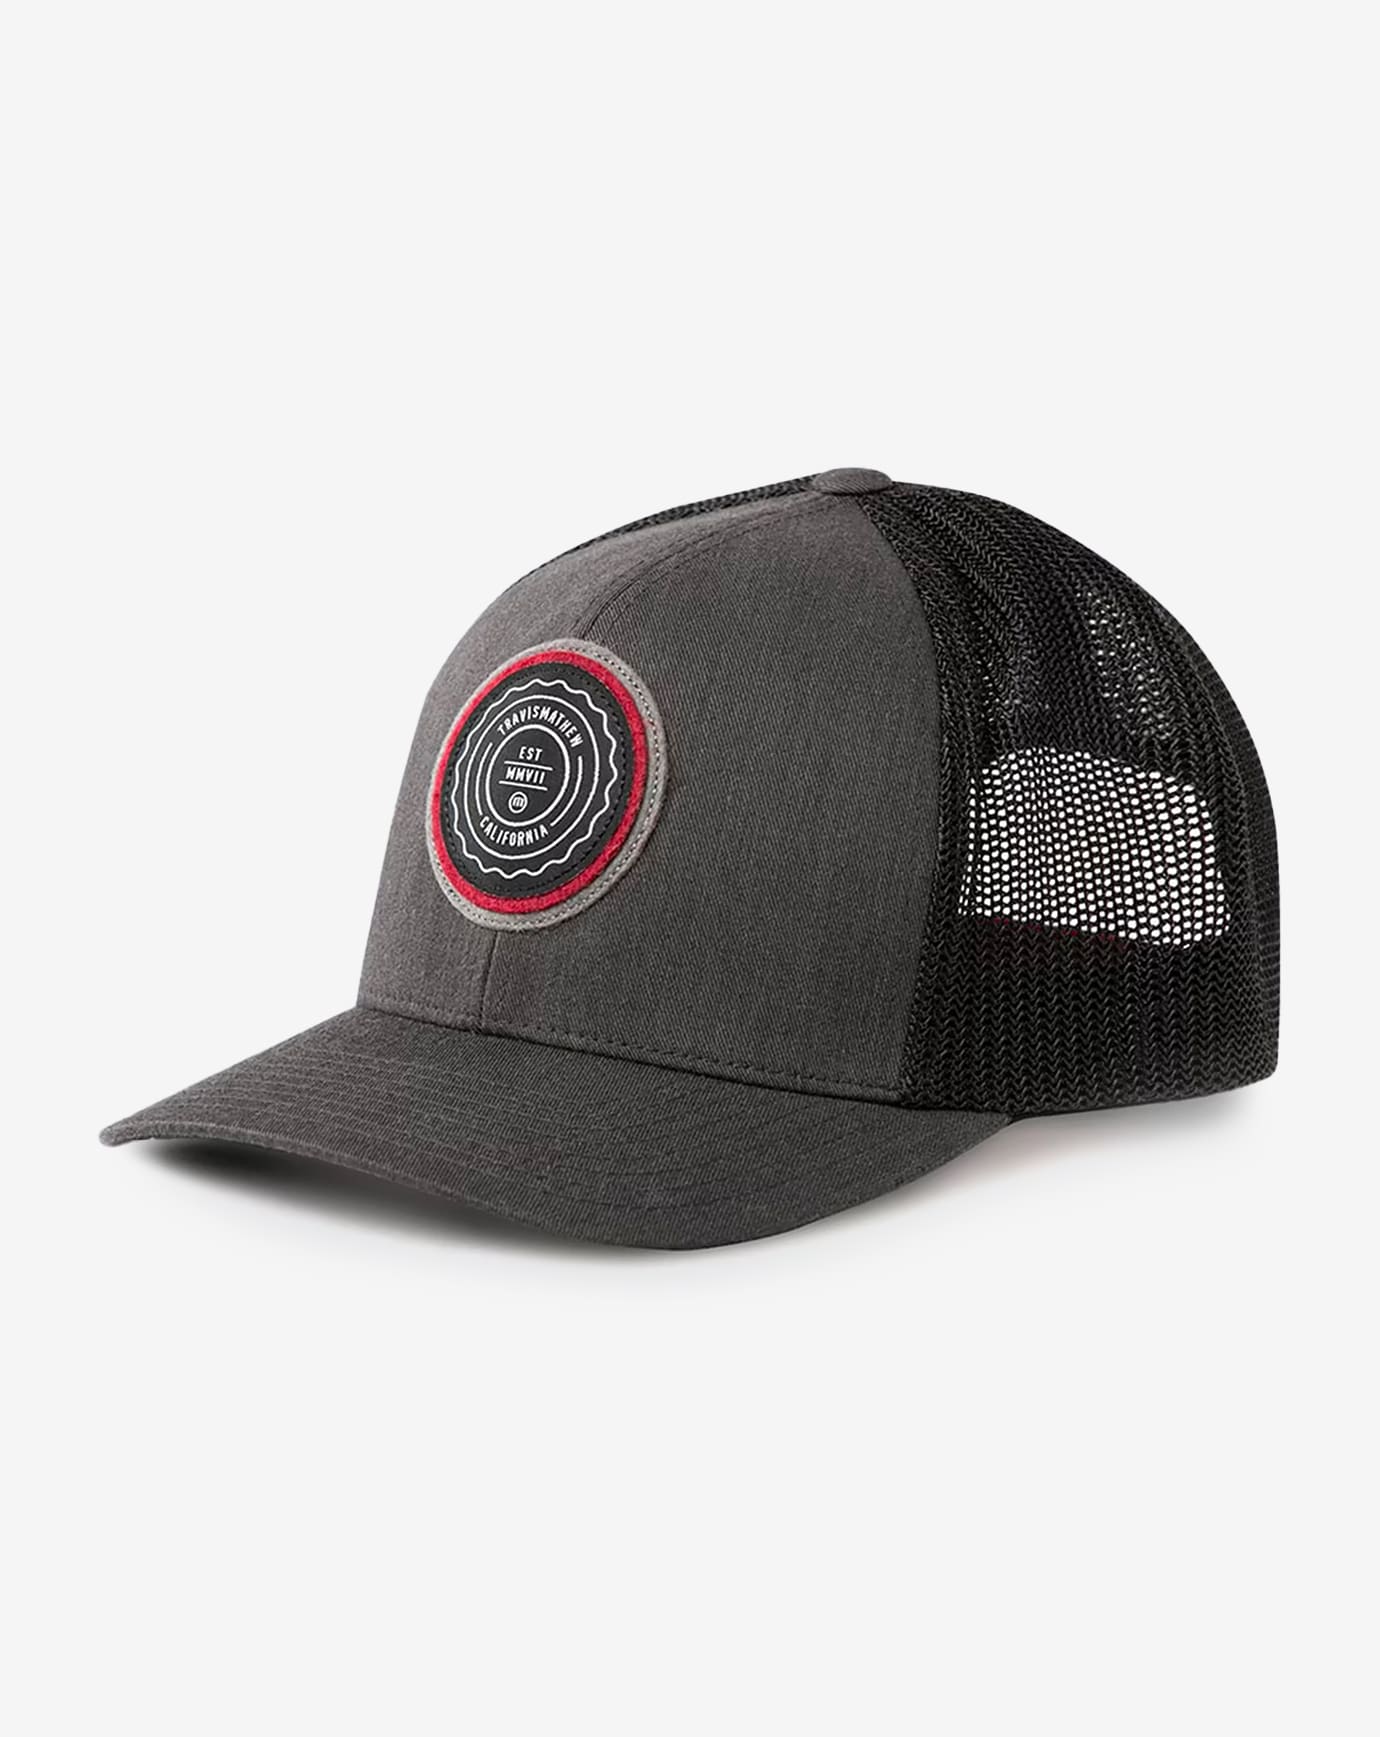 THE PATCH SNAPBACK HAT Image Thumbnail 2